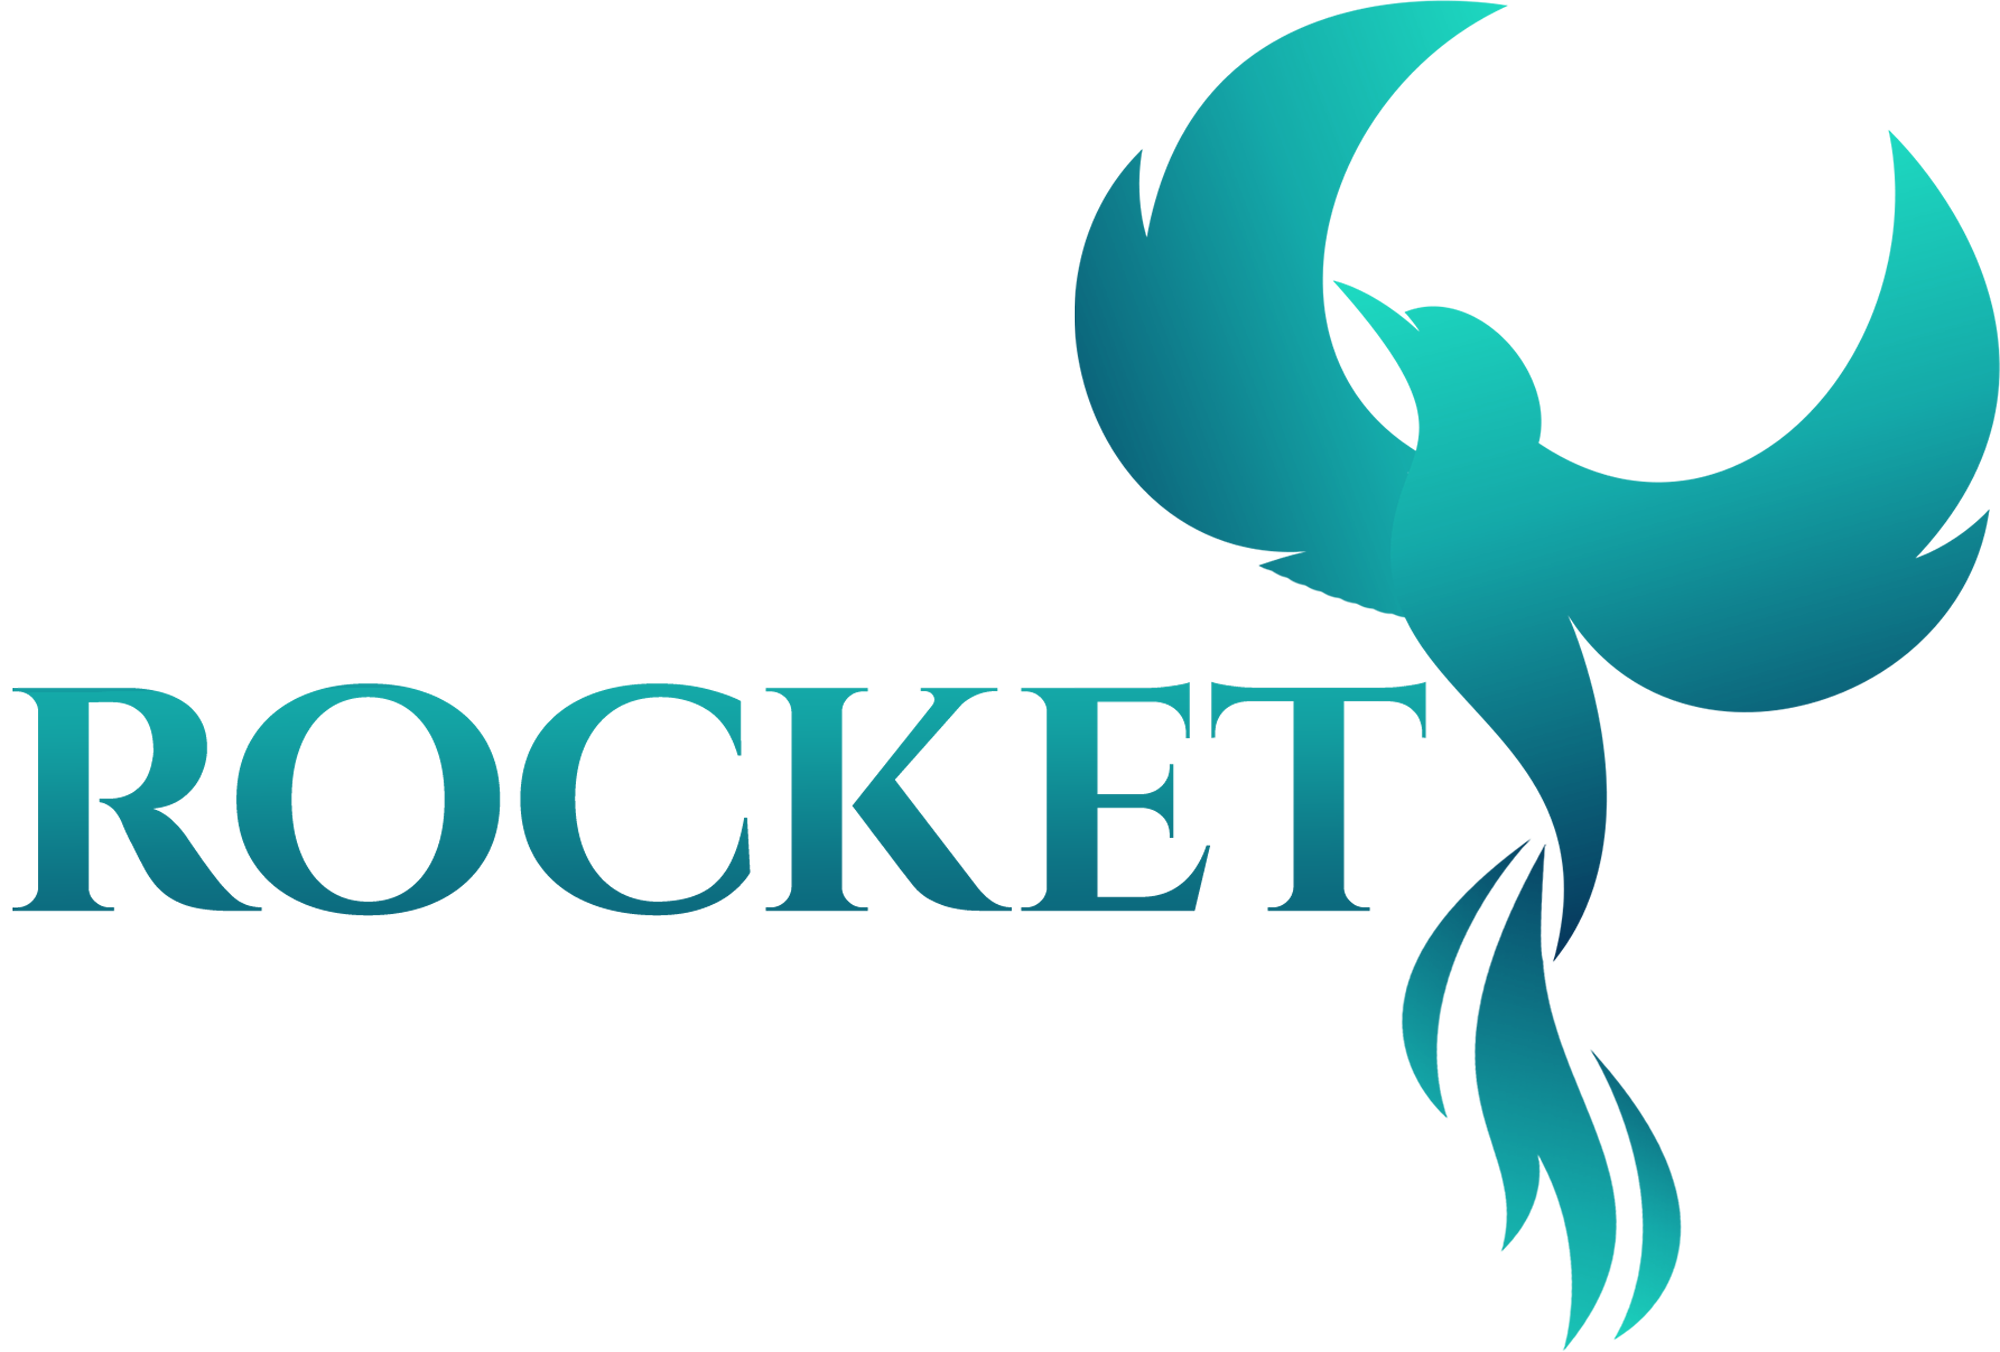 Image of teal bird in flight with ROCKET text